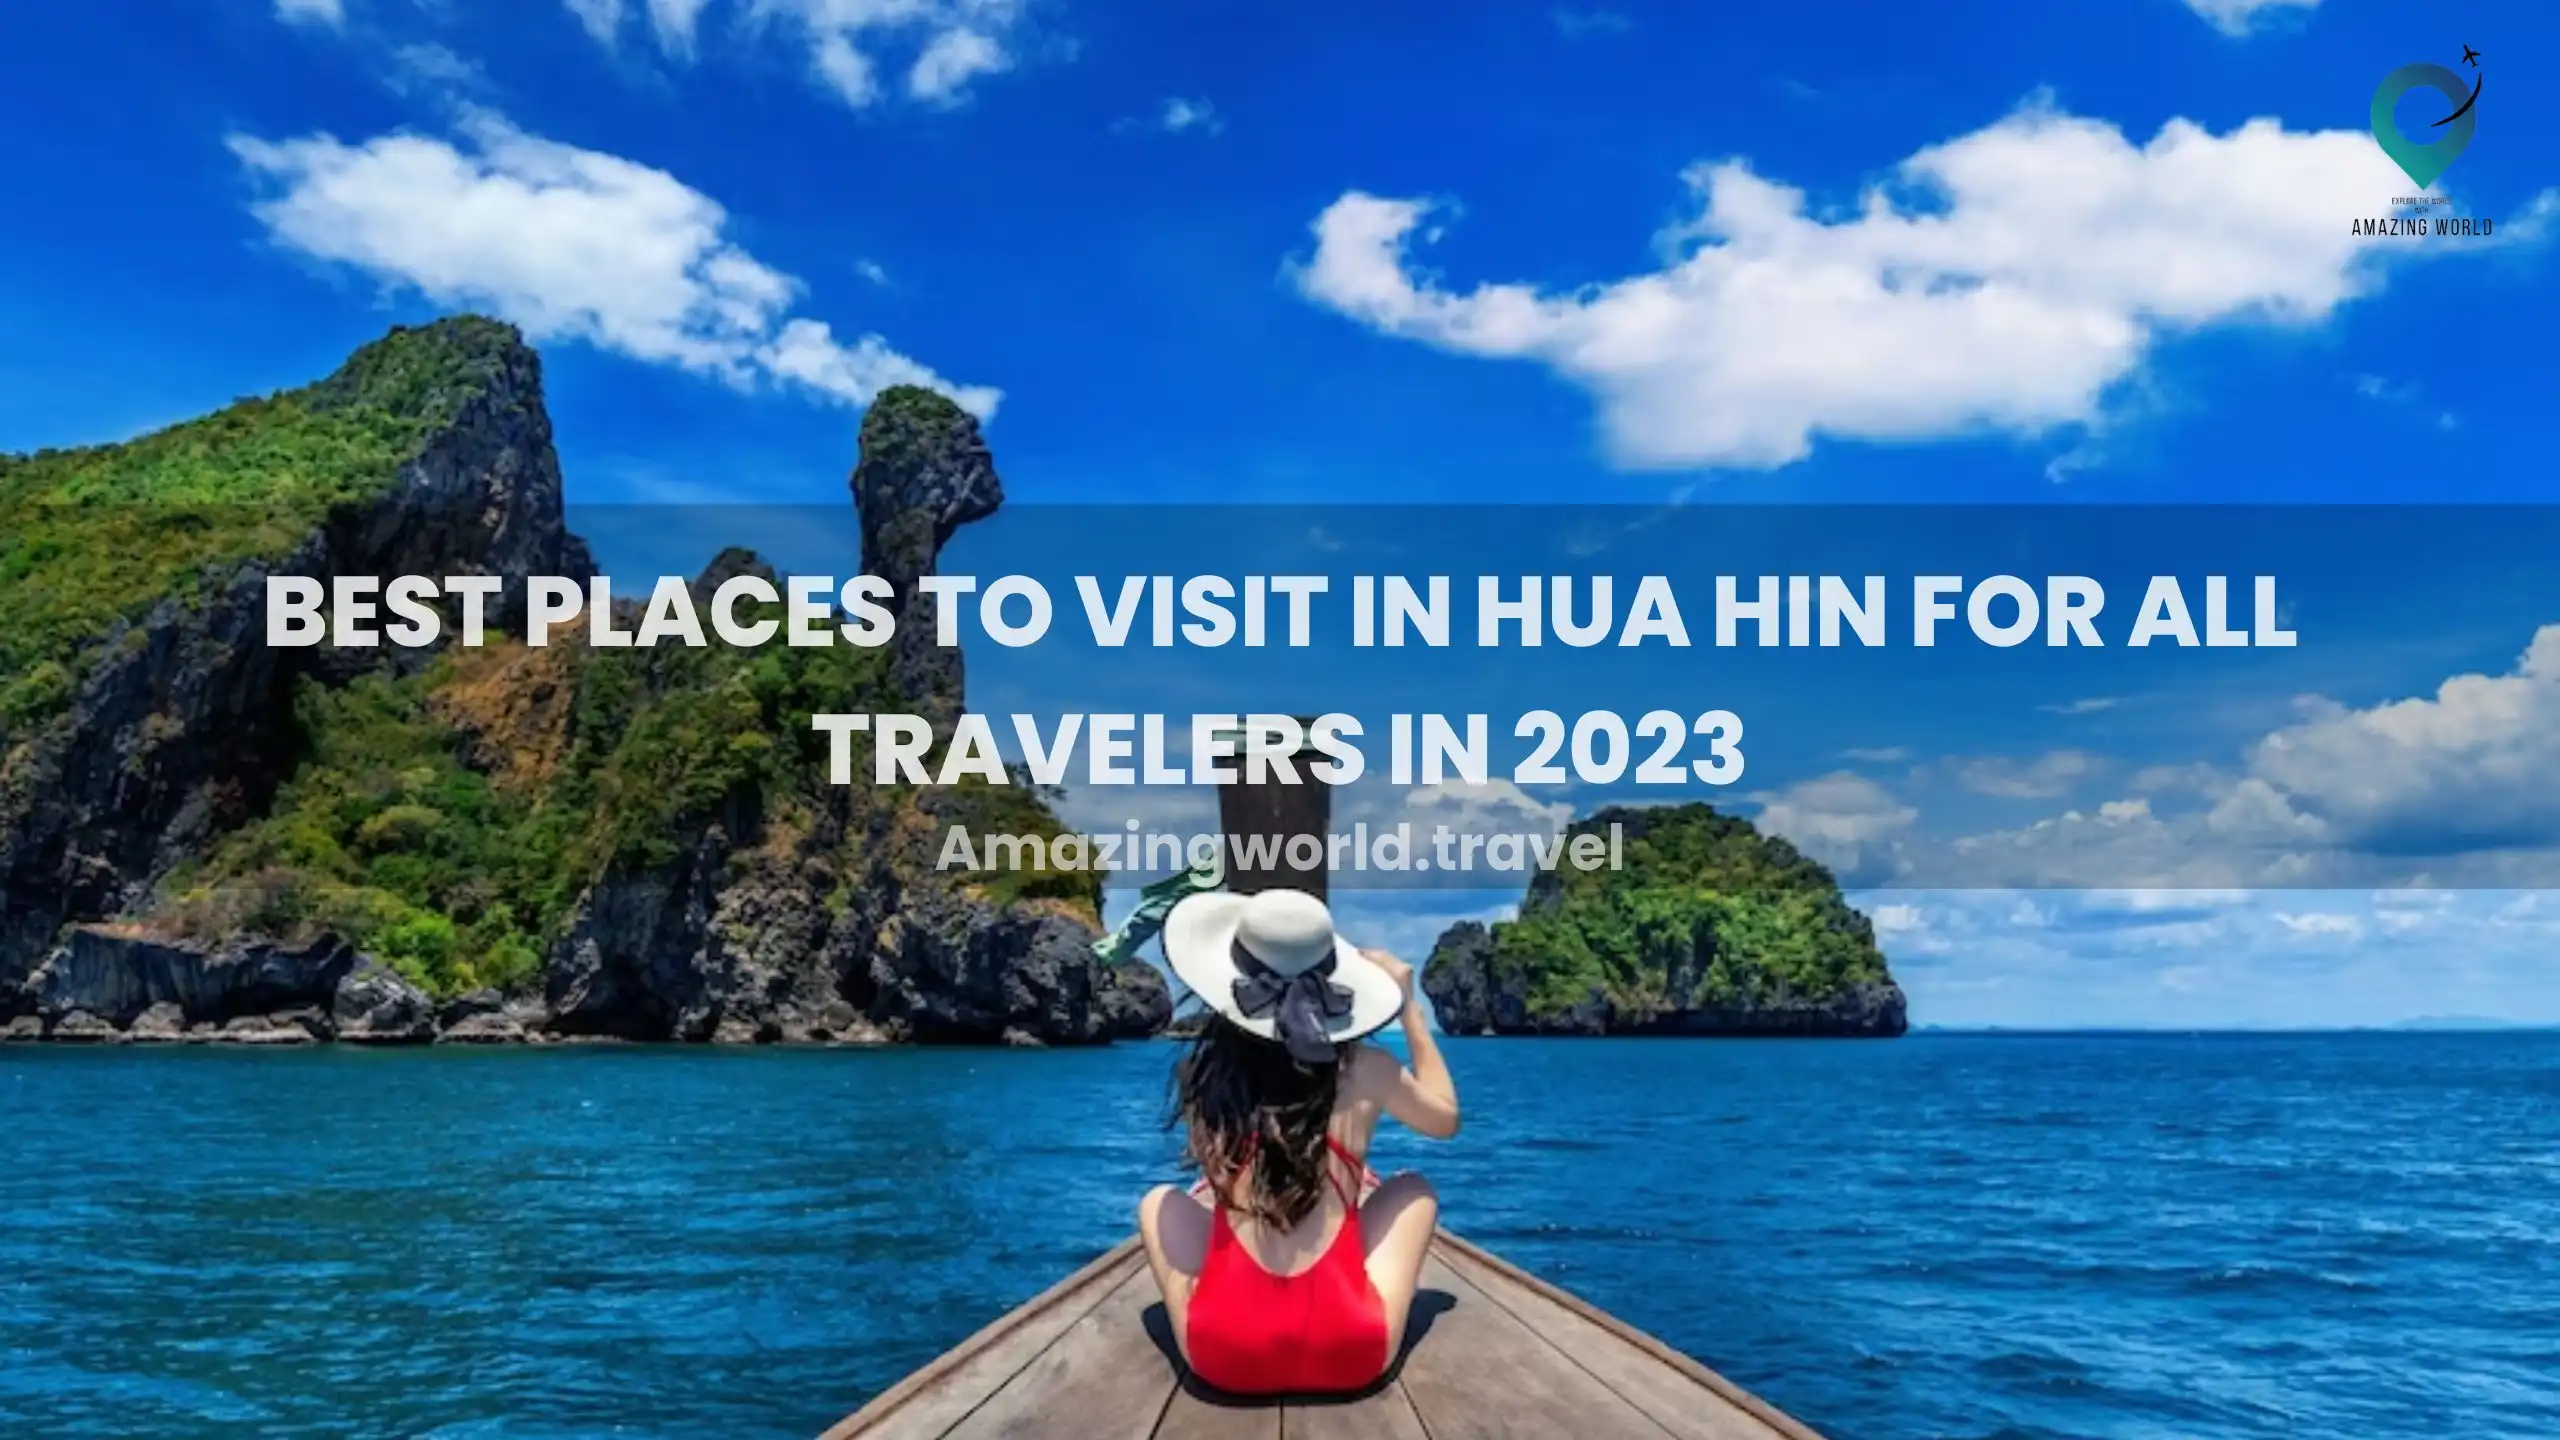 Best-Places-To-Visit-In-Hua-Hin-For-All-Travelers-In-2023